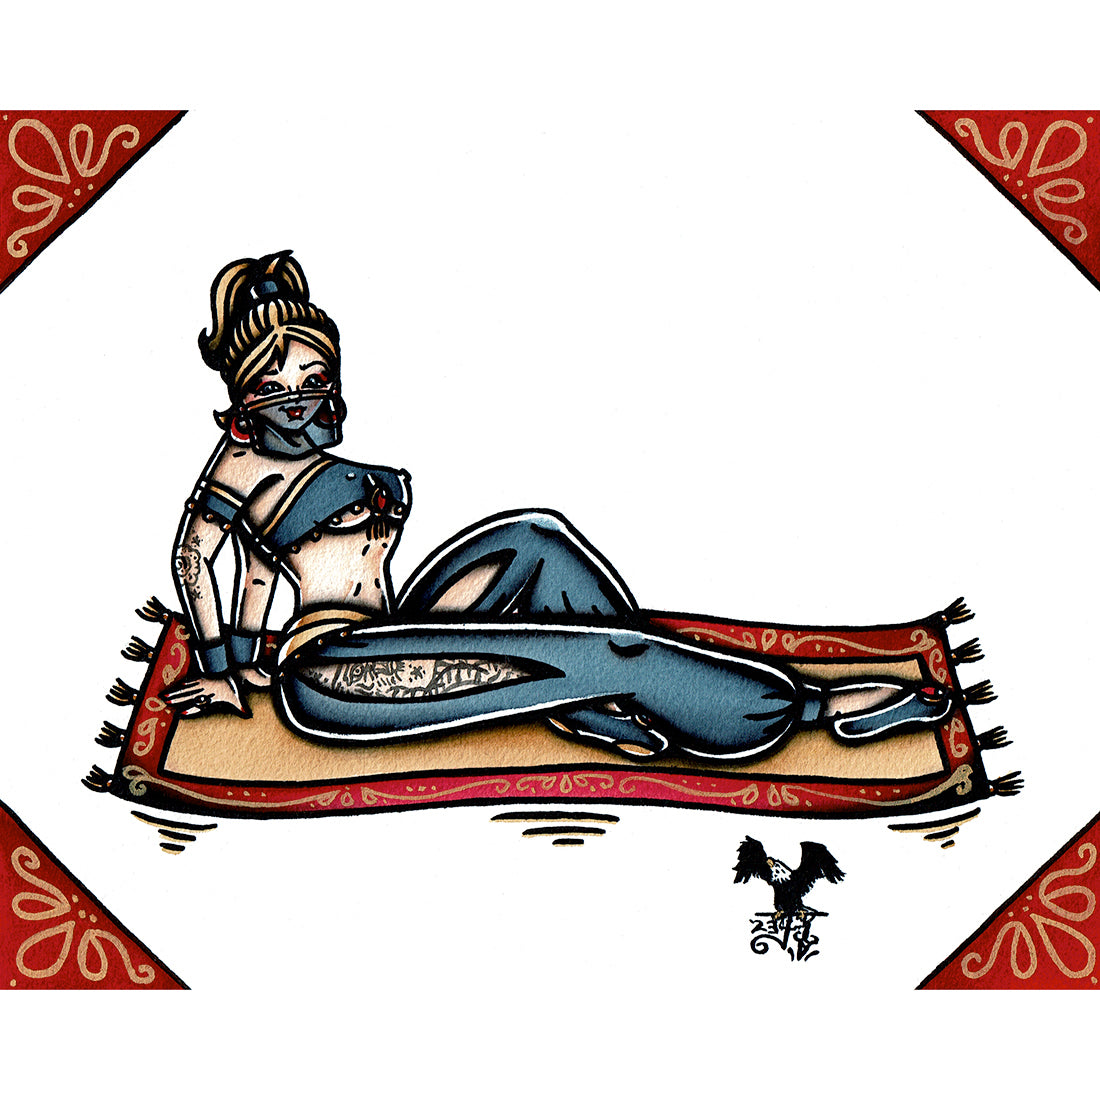 American traditional tattoo flash Magic Carpet Genie Pinup watercolor painting.